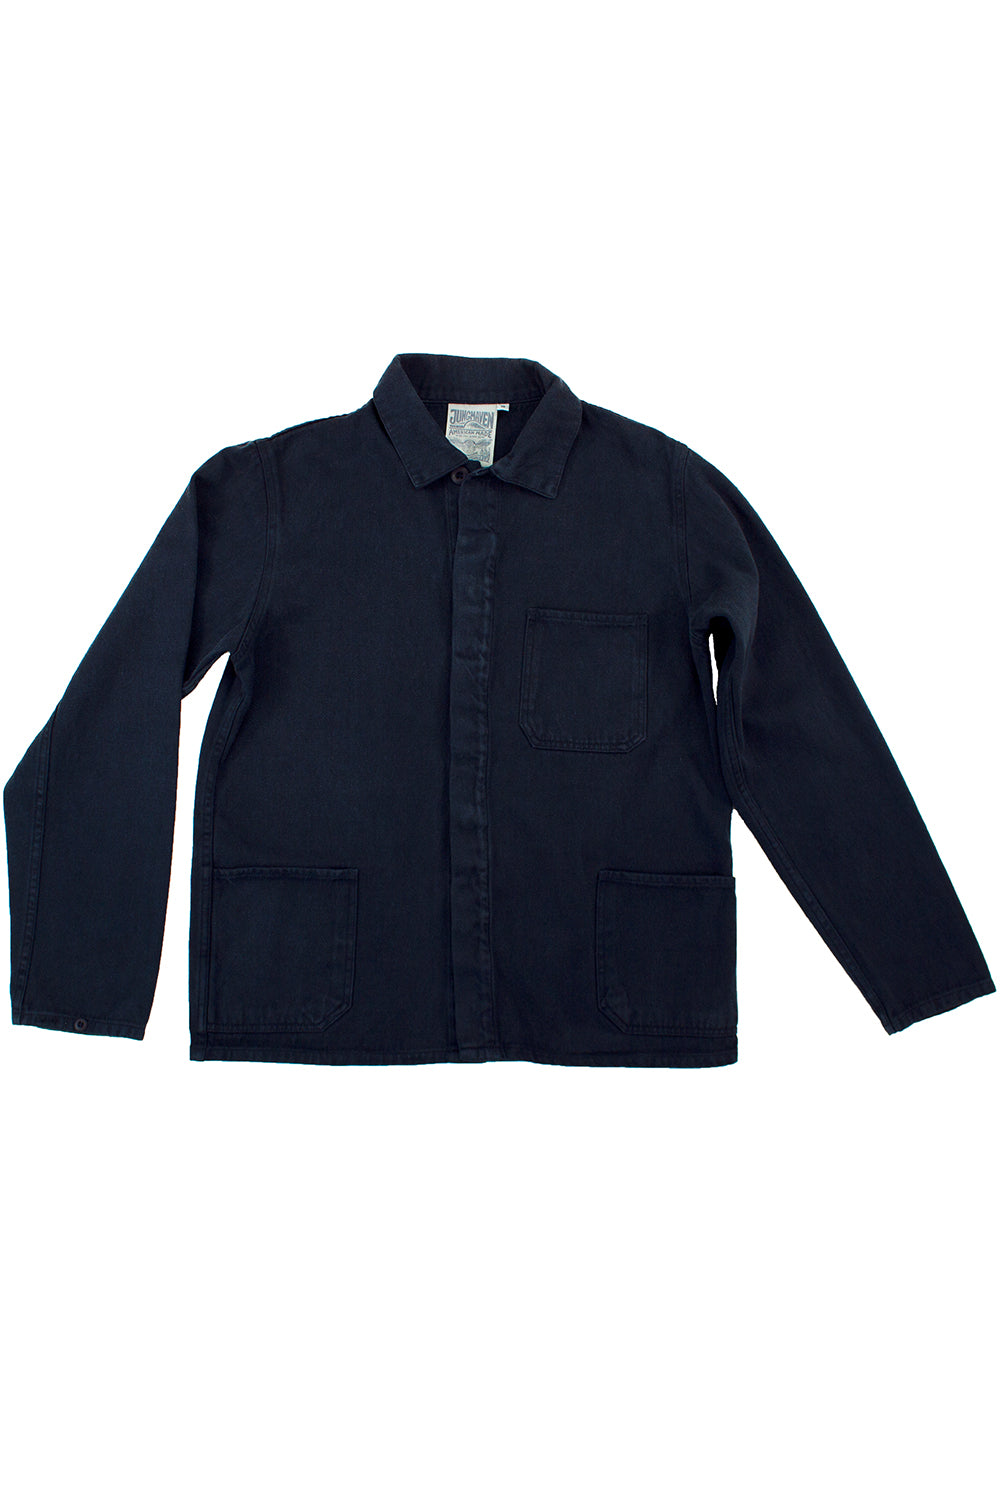 Olympic Jacket | Jungmaven Hemp Clothing & Accessories / Color: Navy